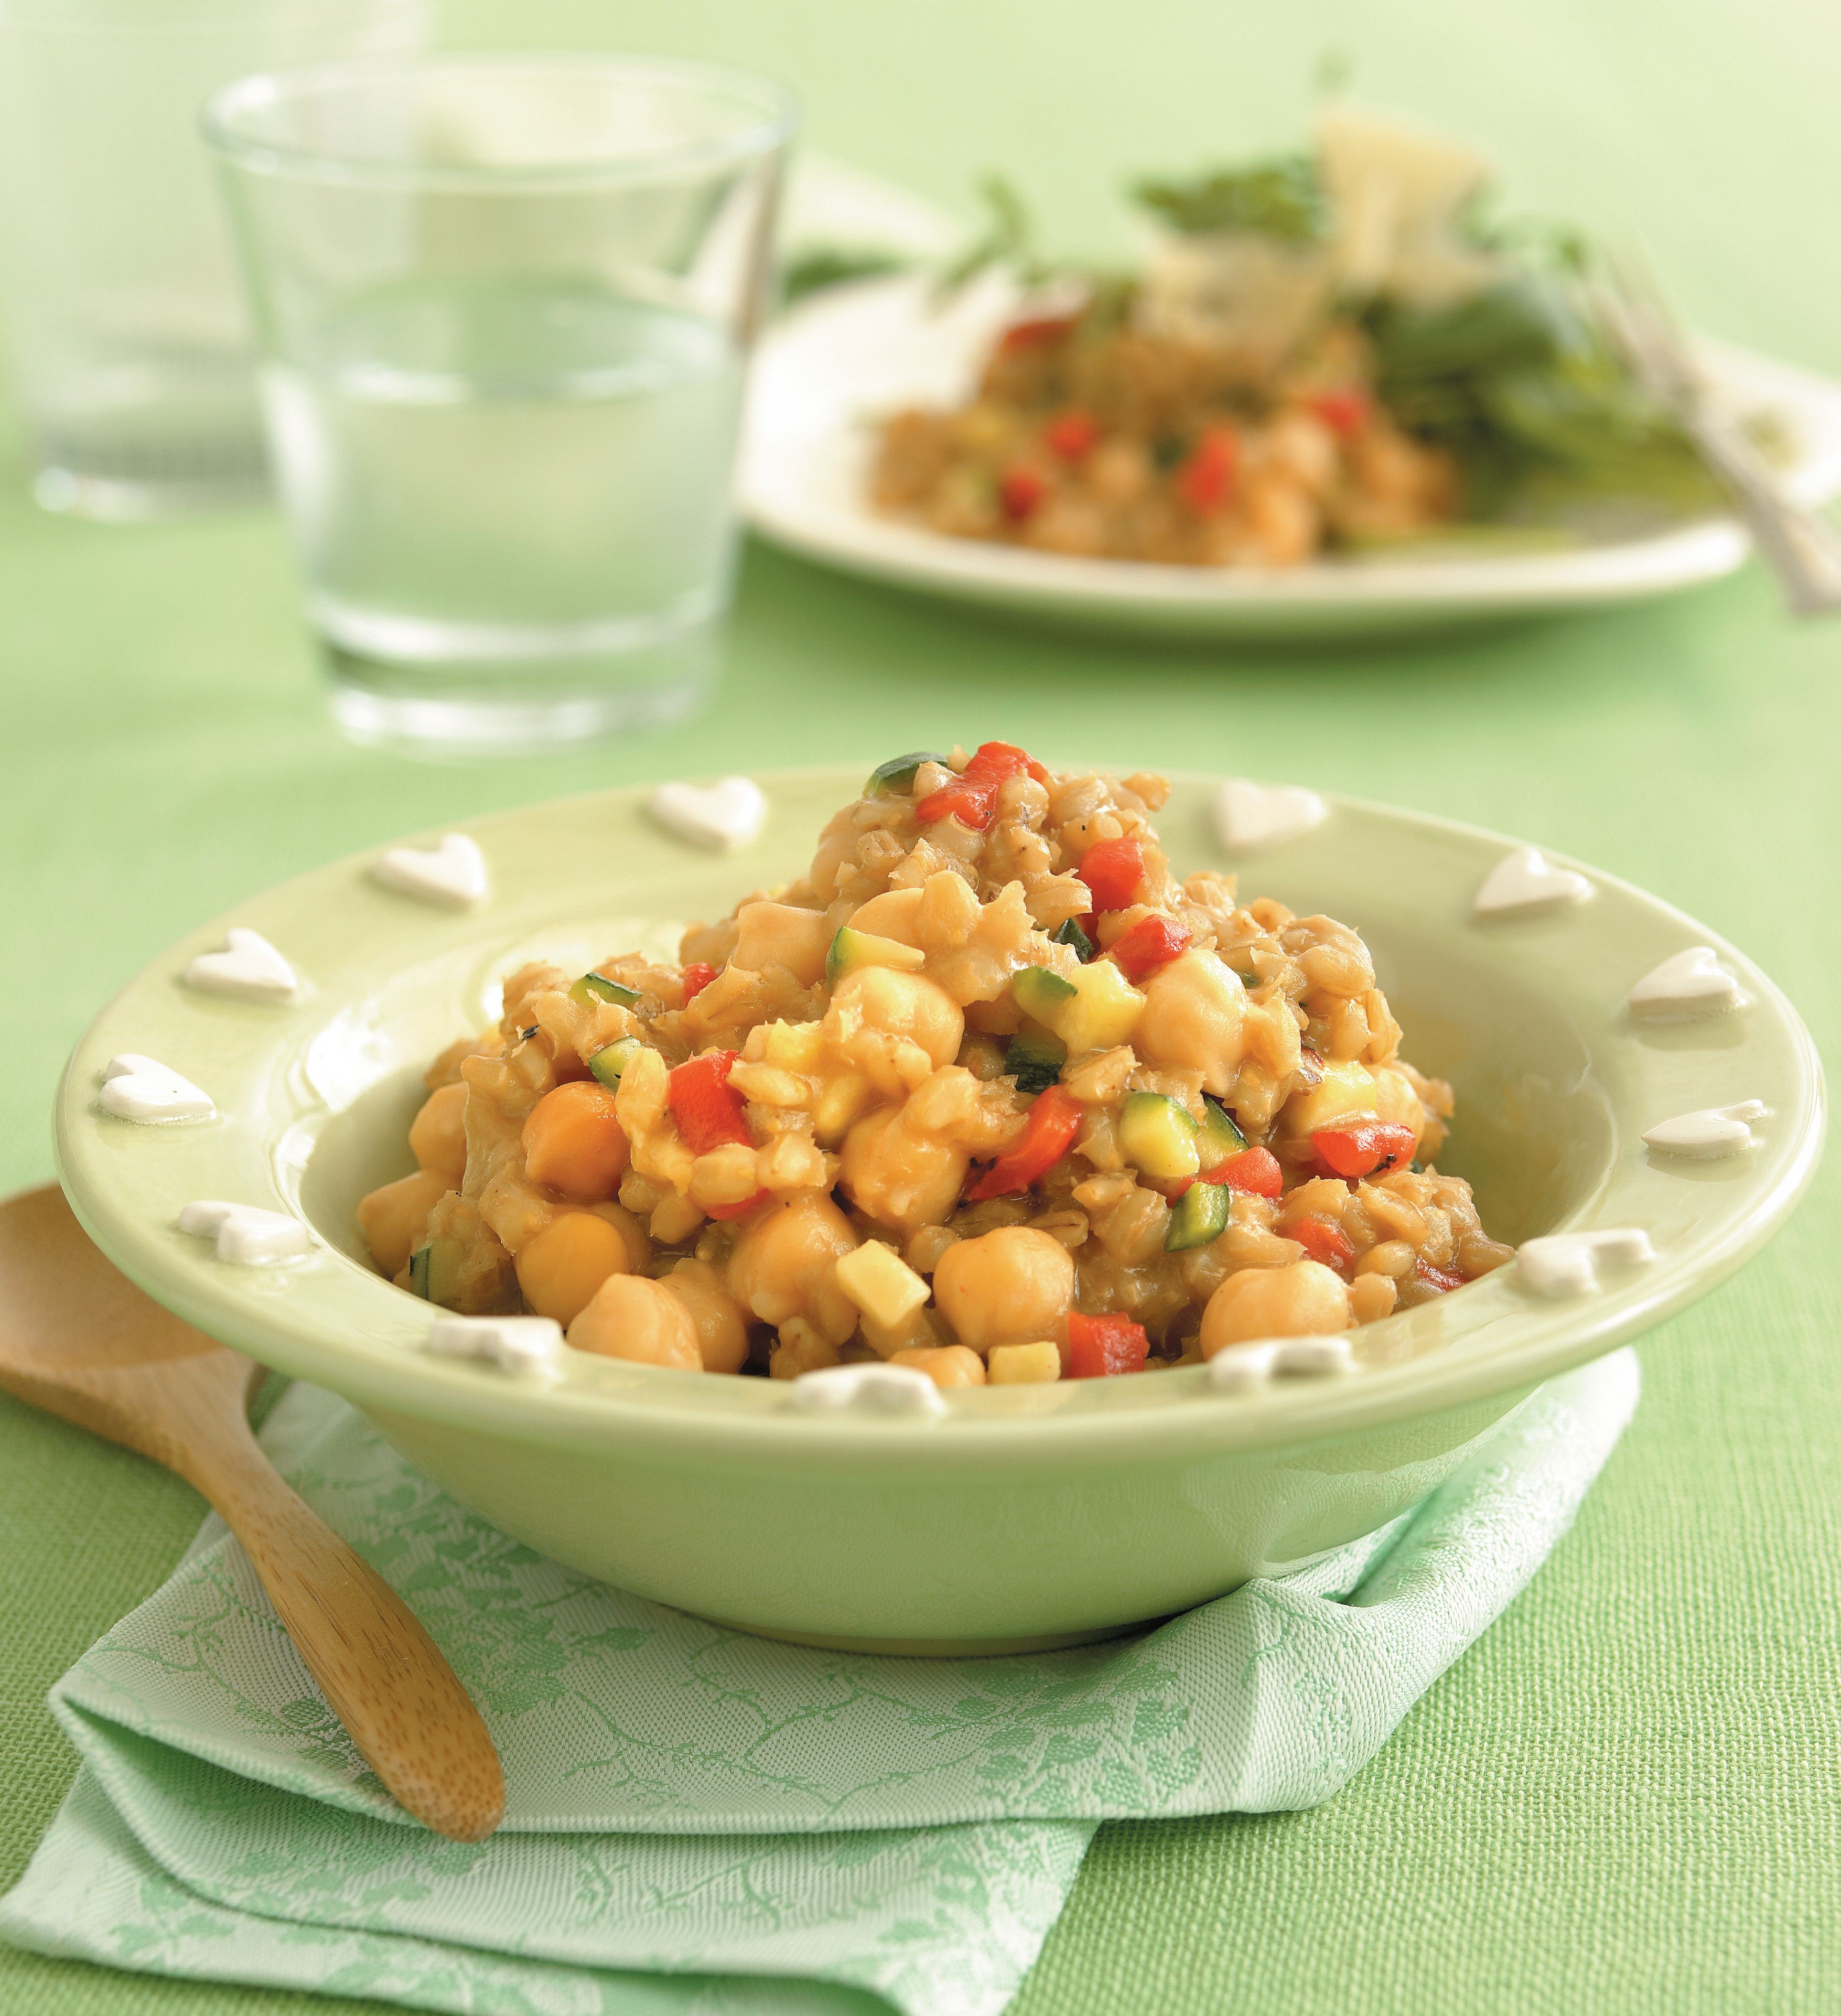 Barley risotto with chickpeas